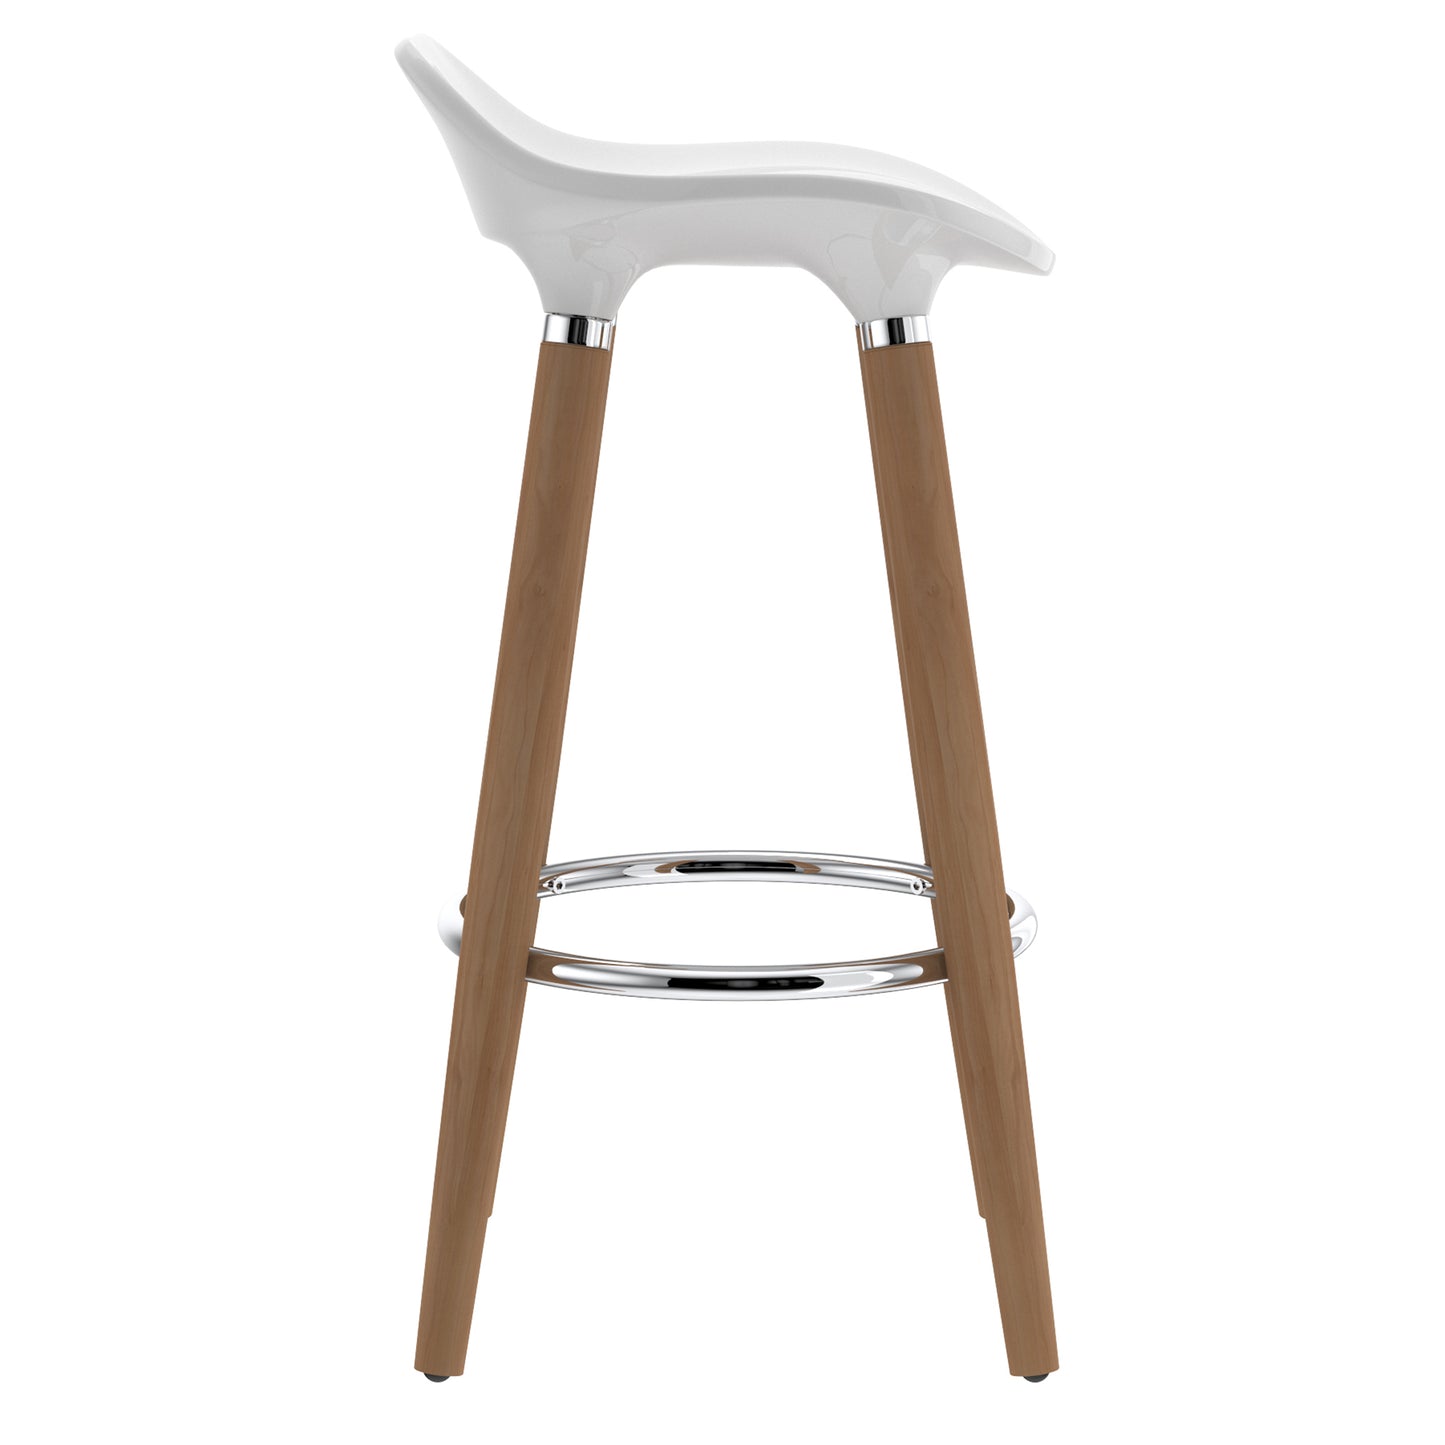 (TREX WHITE- 2 PACK) - PLASTIC COUNTER STOOLS